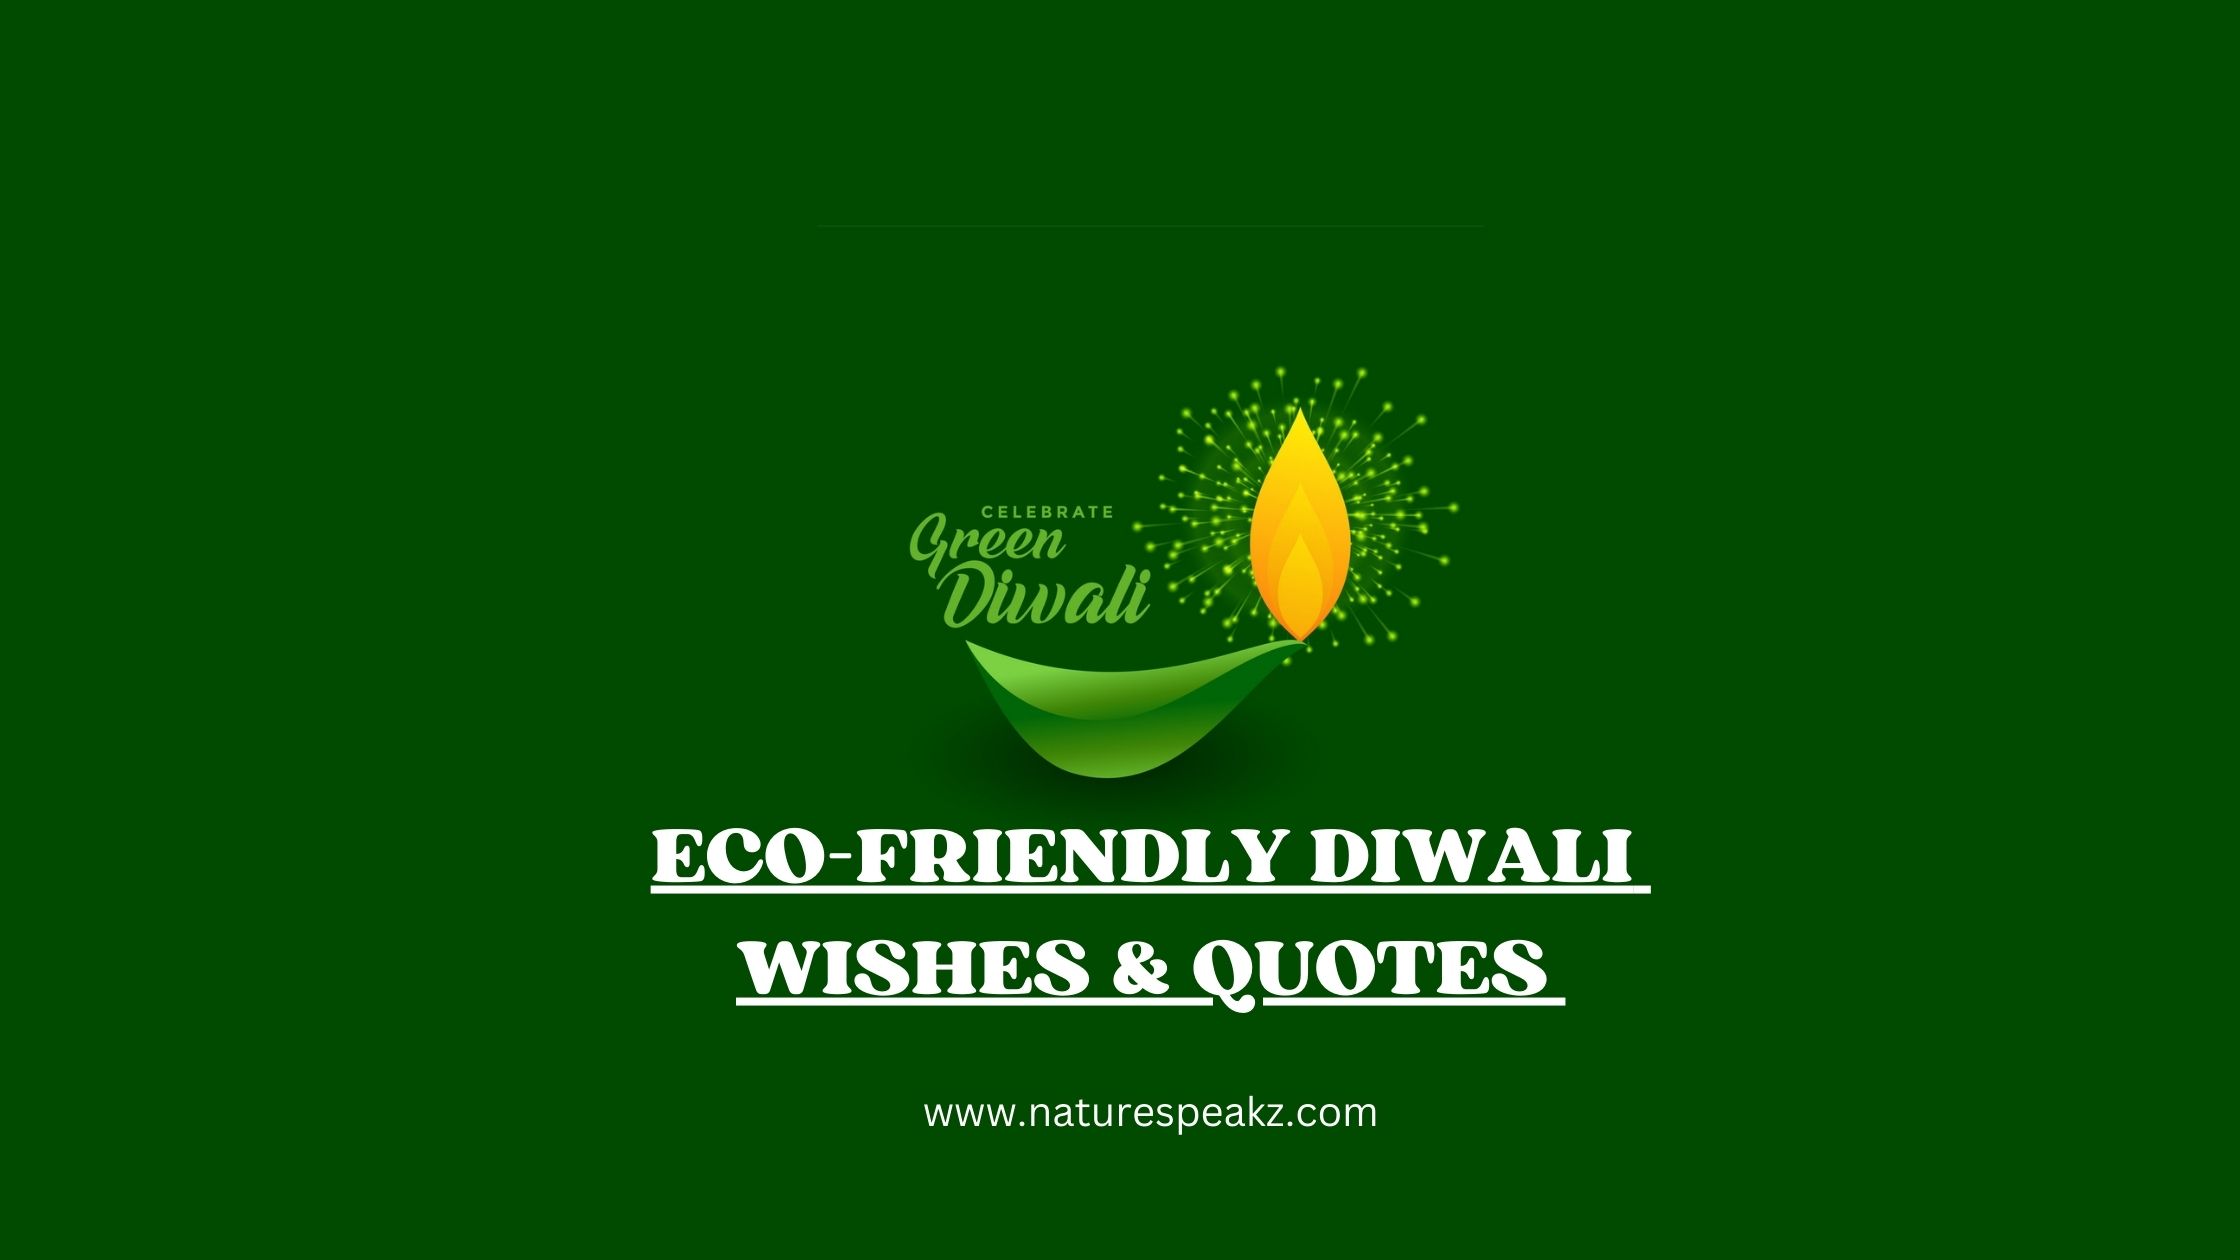 Eco-friendly Diwali Wishes & Quotes 